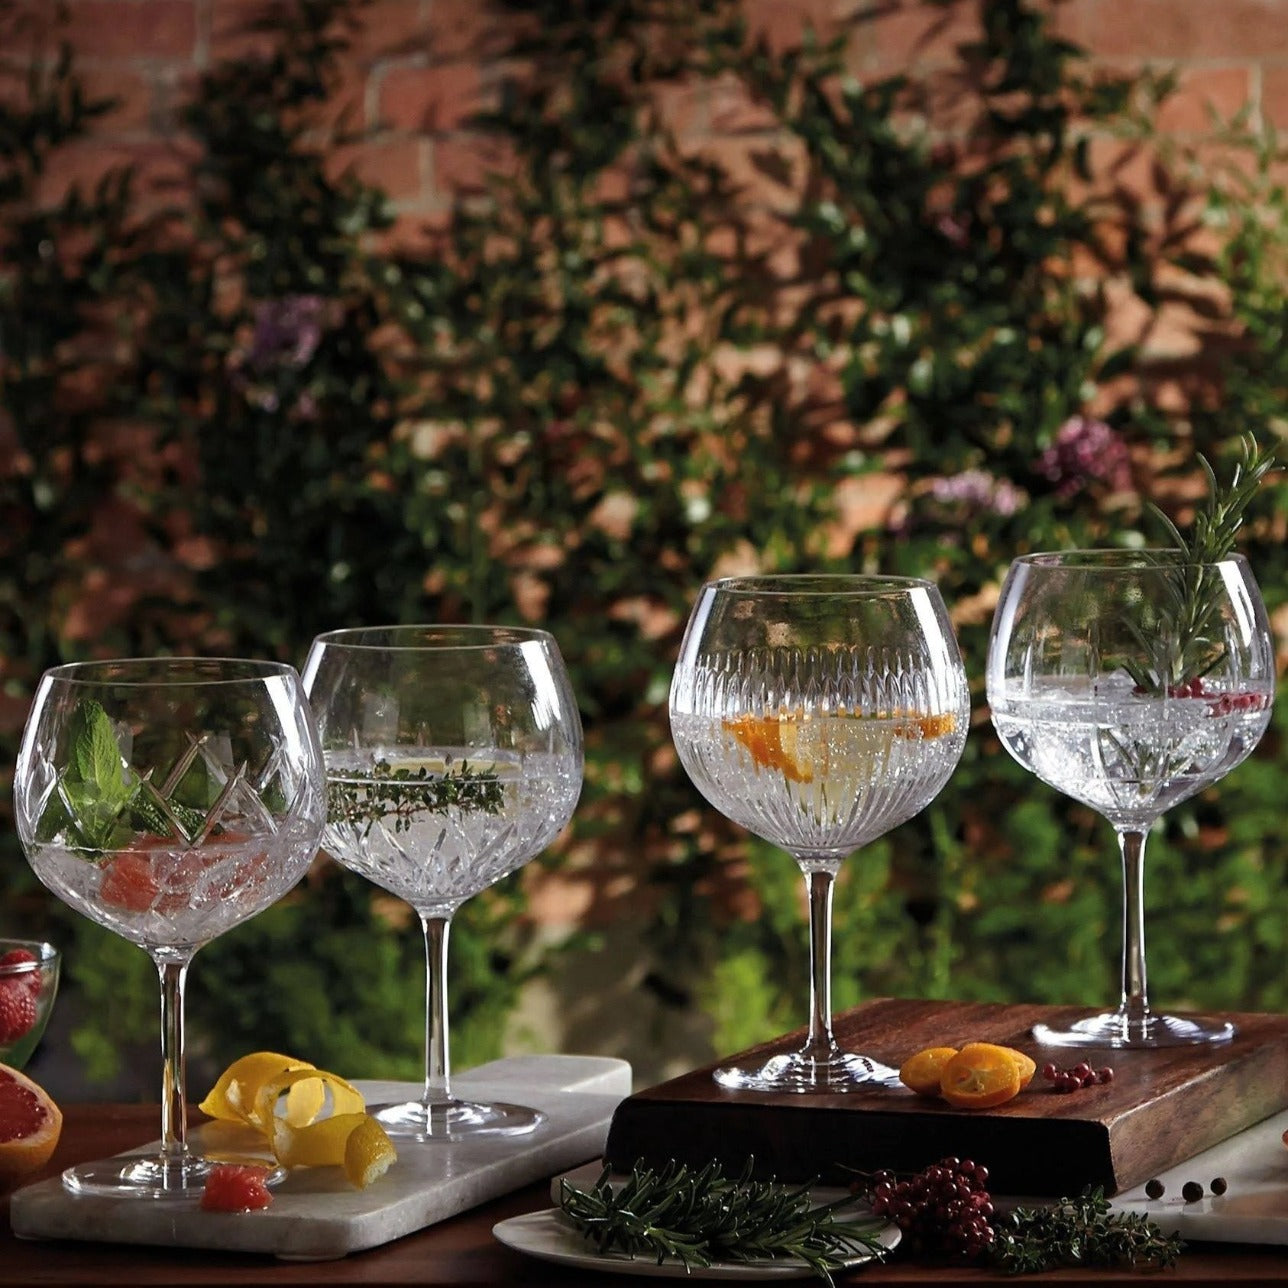 Waterford Crystal Gin Journeys Balloon Wine Glass, Set of 4  Indulge in the optimum gin experience with our striking set of four Gin Journeys Balloon Wine glasses, designed by tasting experts to enrich the aromas and botanical flavours of this iconic summer spirit.